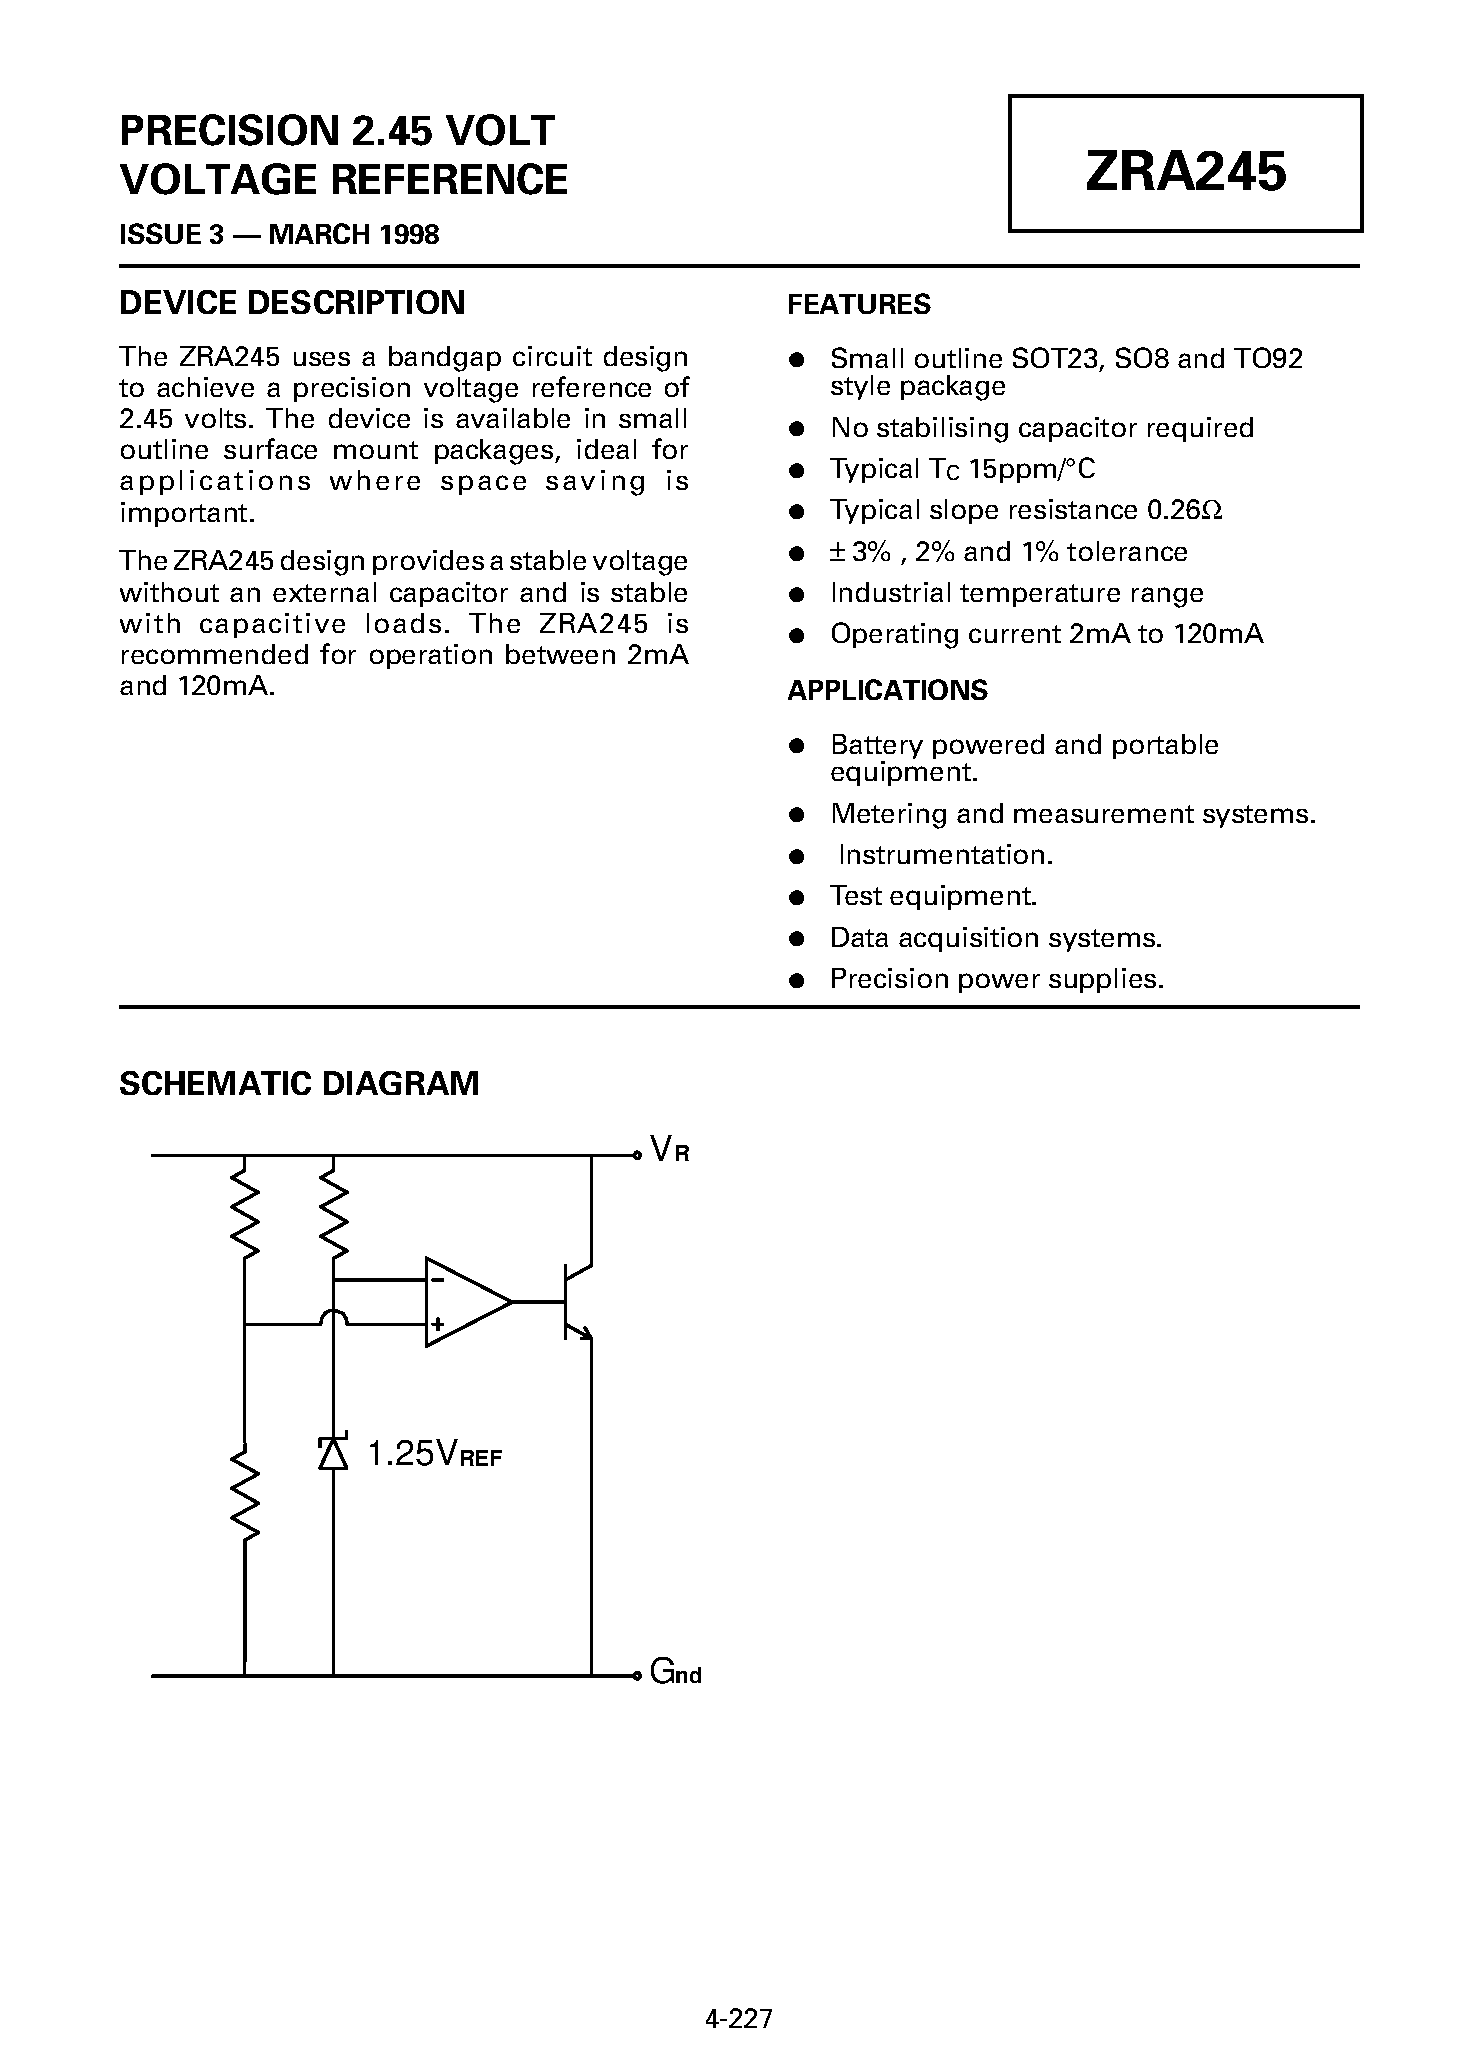 Datasheet ZRA245Y03 - PRECISION 2.45 VOLT VOLTAGE REFERENCE page 1